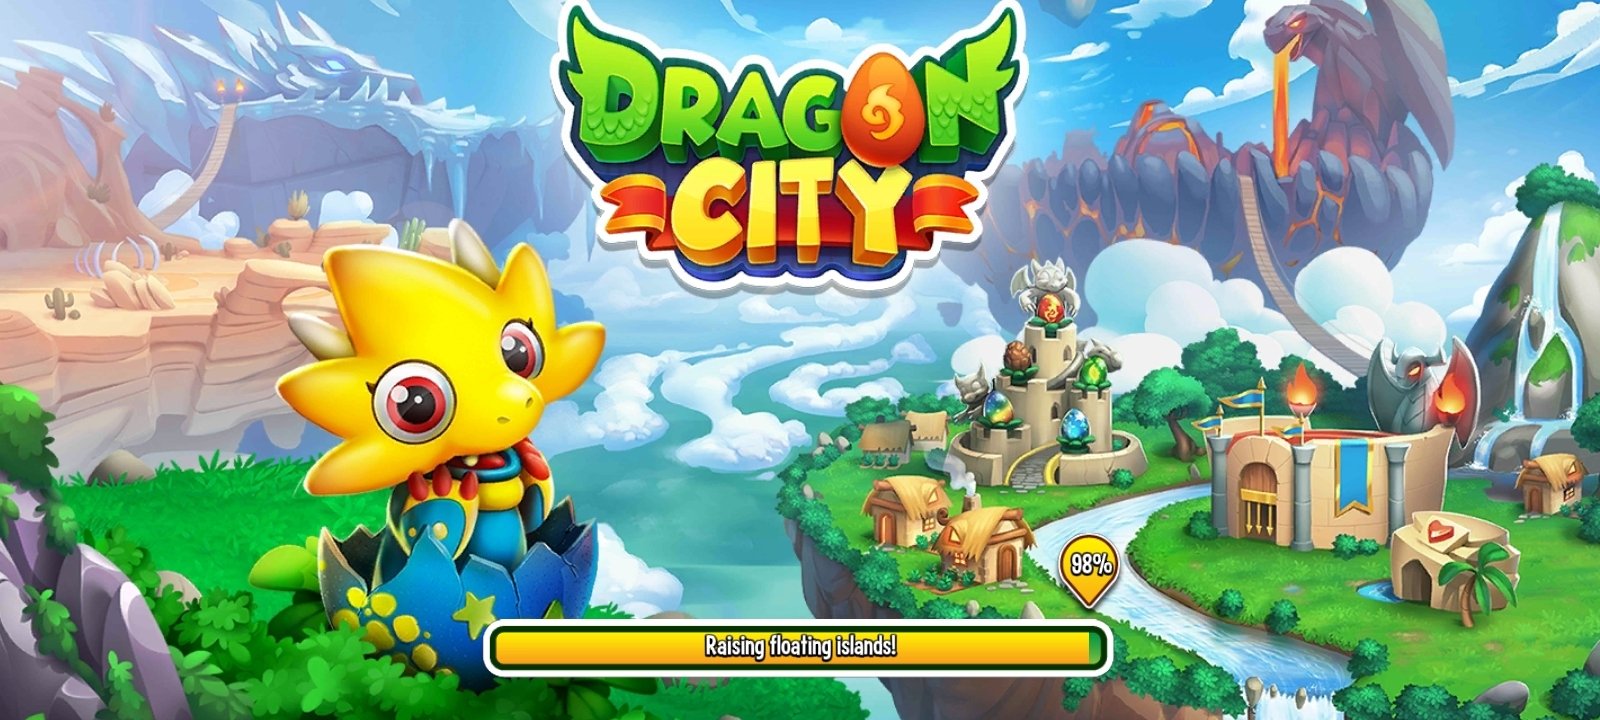 No Root Dragoncity.G4mer.Win Dragon City Mod Apk 9.9.3 Free 999,999 Free Fire Gems and Golds